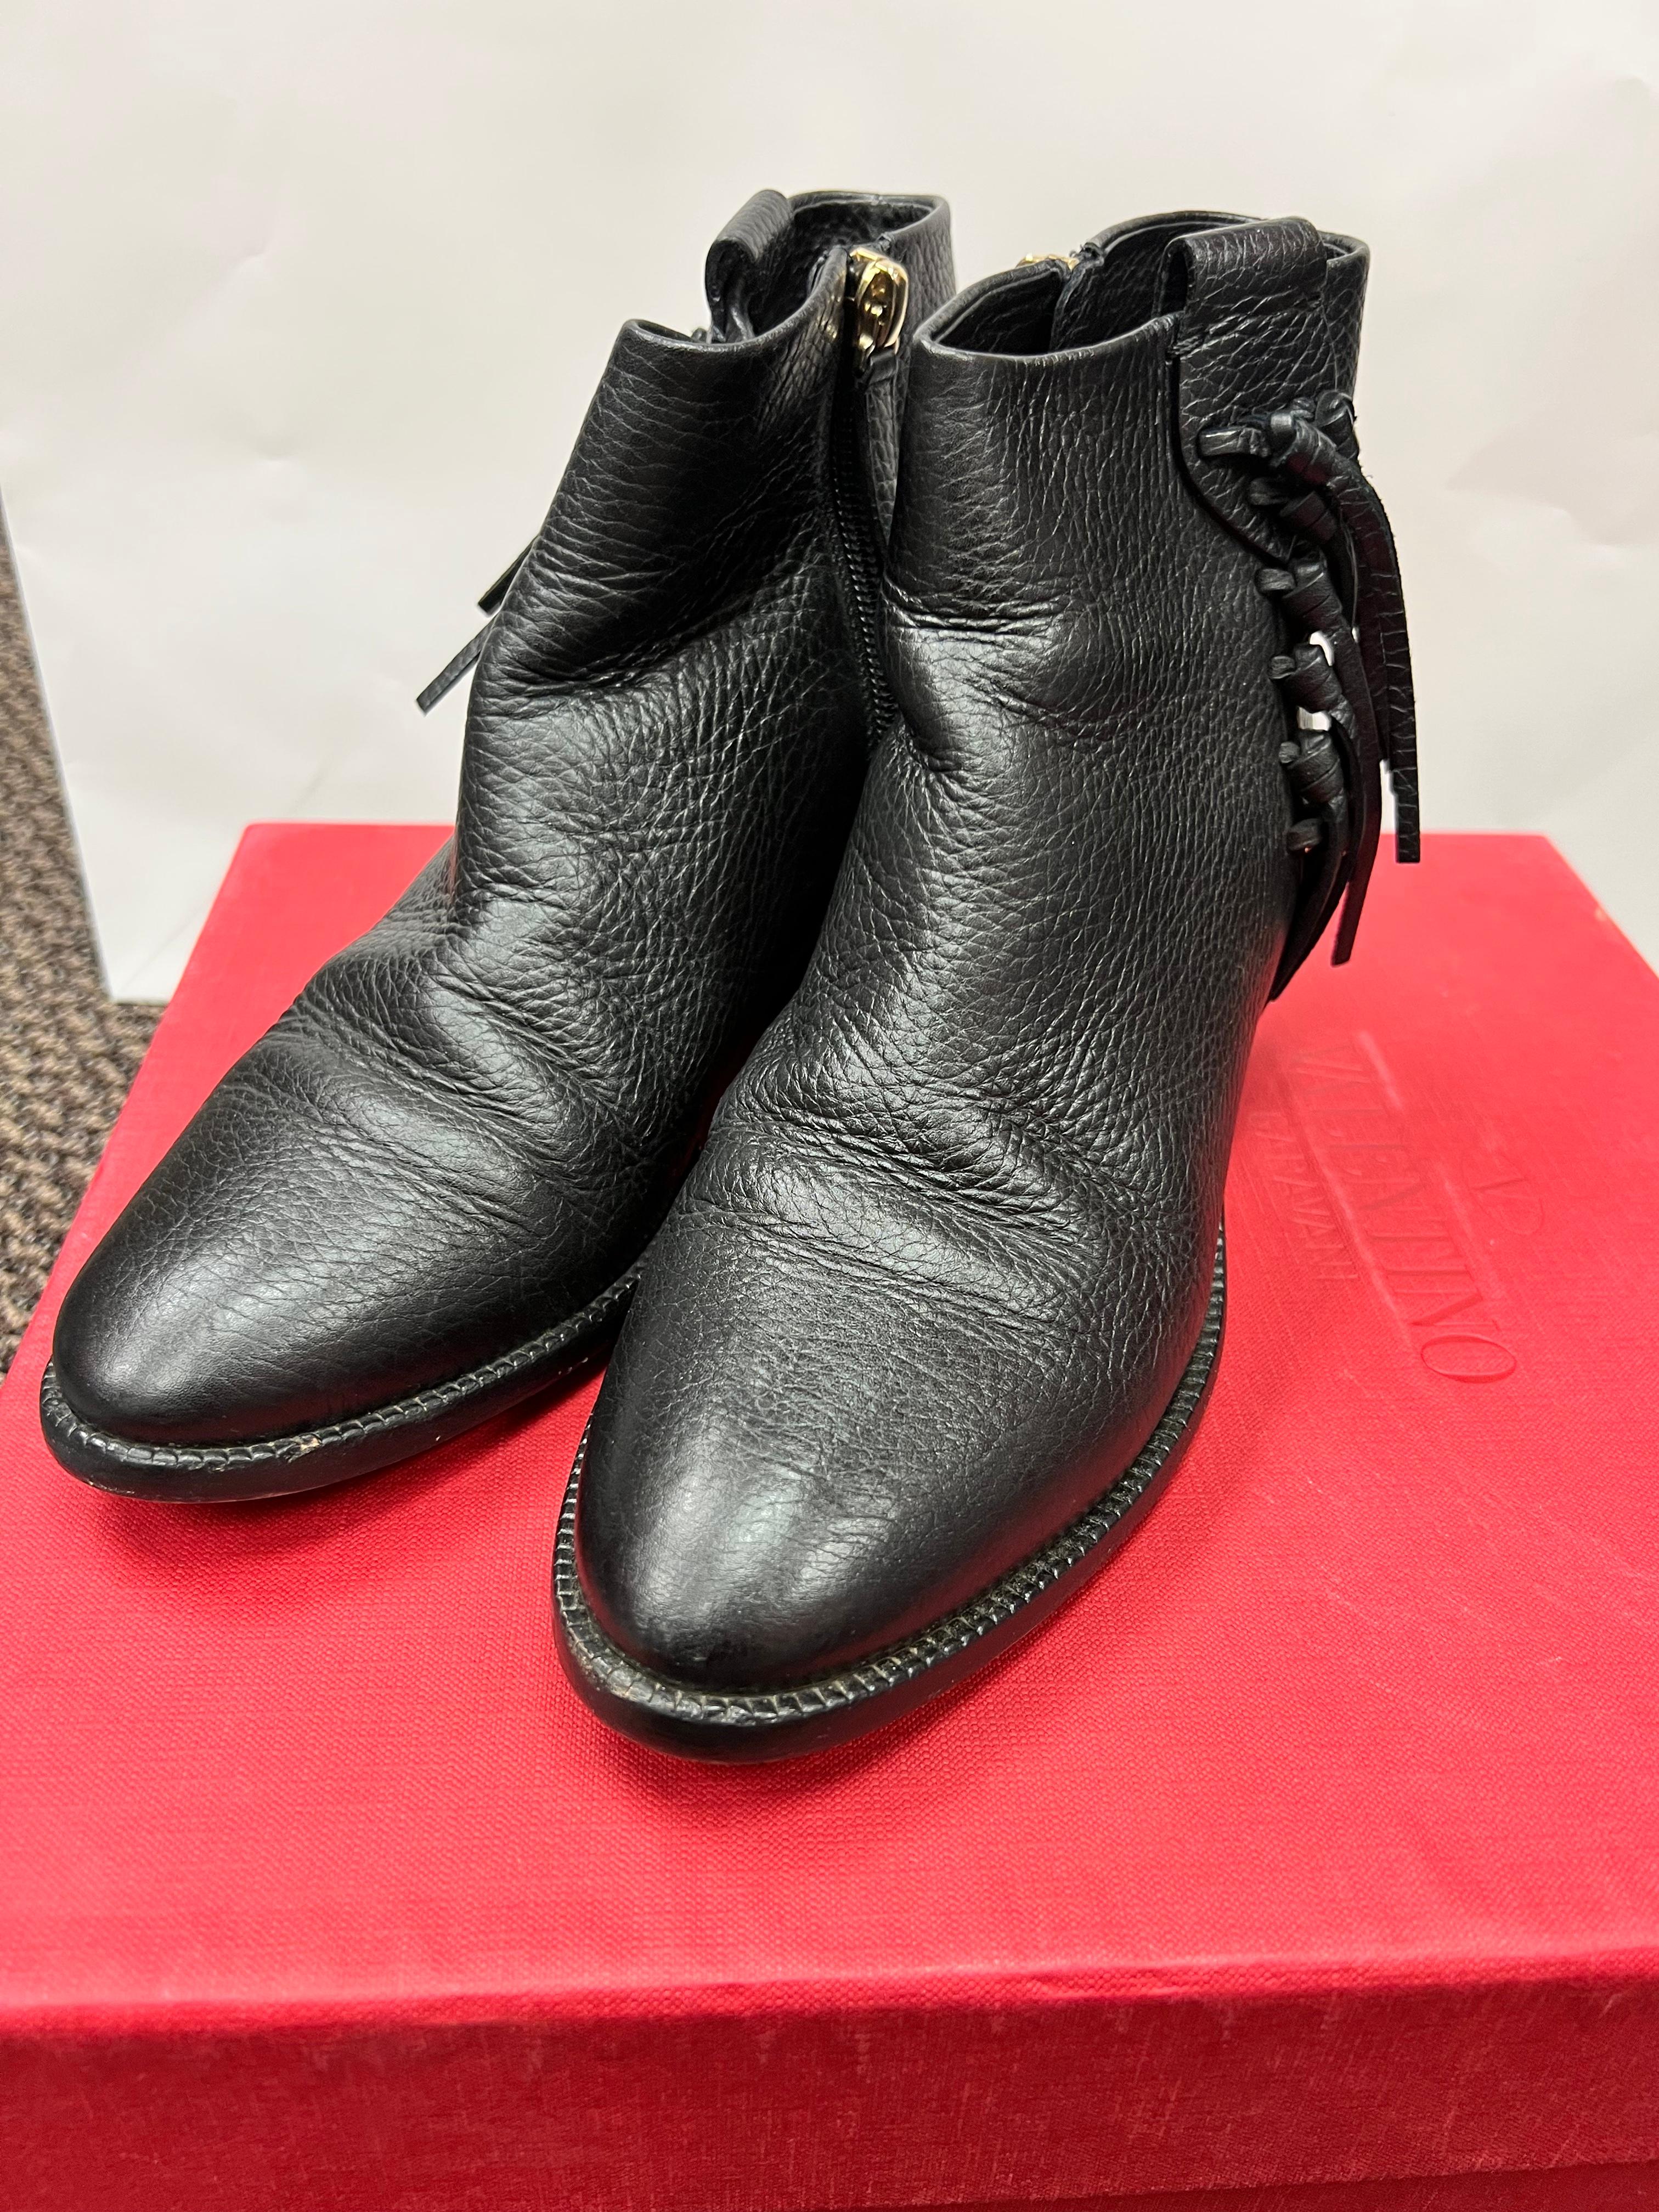 Valentino Black, Leather Fringe Boots. Ankle height with zipper. 
Size 36 in pristine condition (see soles)
Leather slightly relaxed. 
Estimated retail $1265
